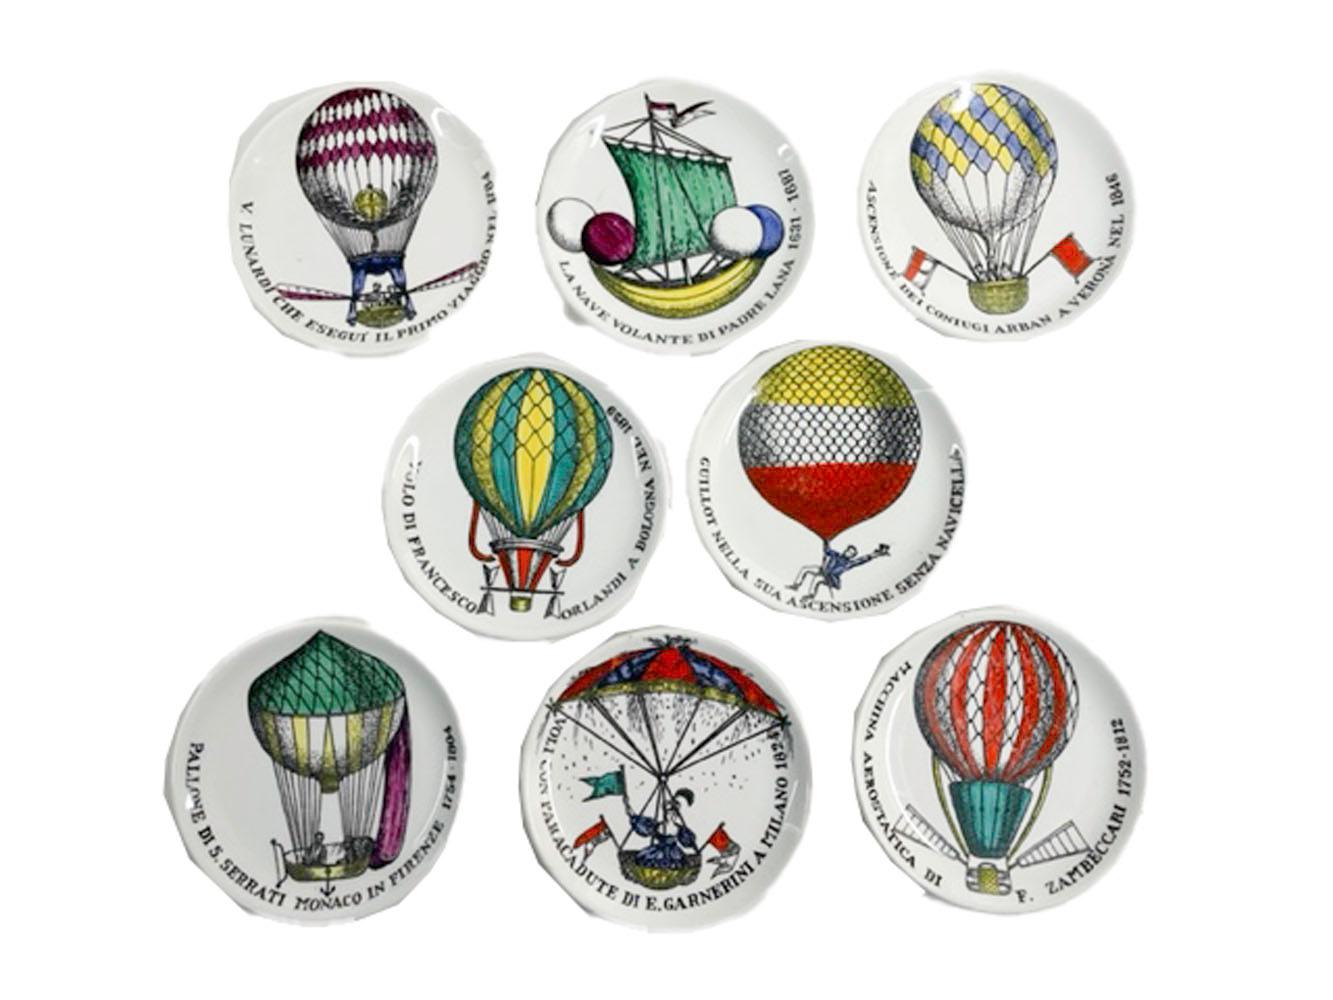 Mid-Century Modern MCM Ceramic Coasters by Fornasetti, Painted with Hot Air Balloons, 